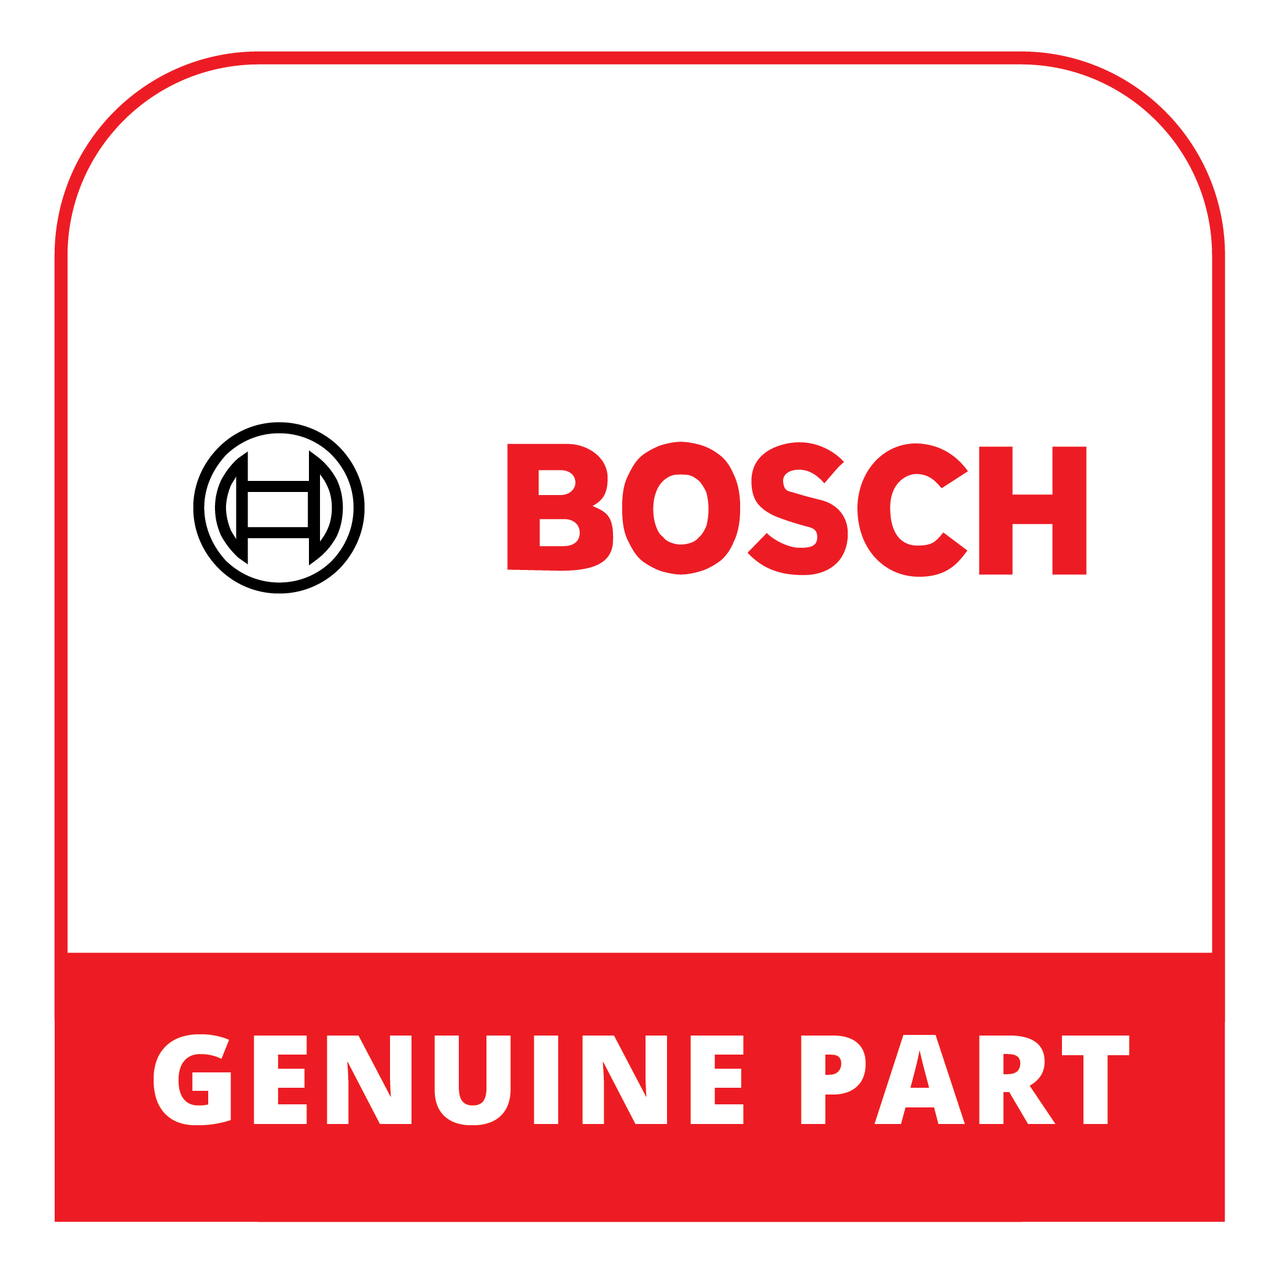 Bosch (Thermador) 20000013 - Back Panel - Genuine Bosch (Thermador) Part